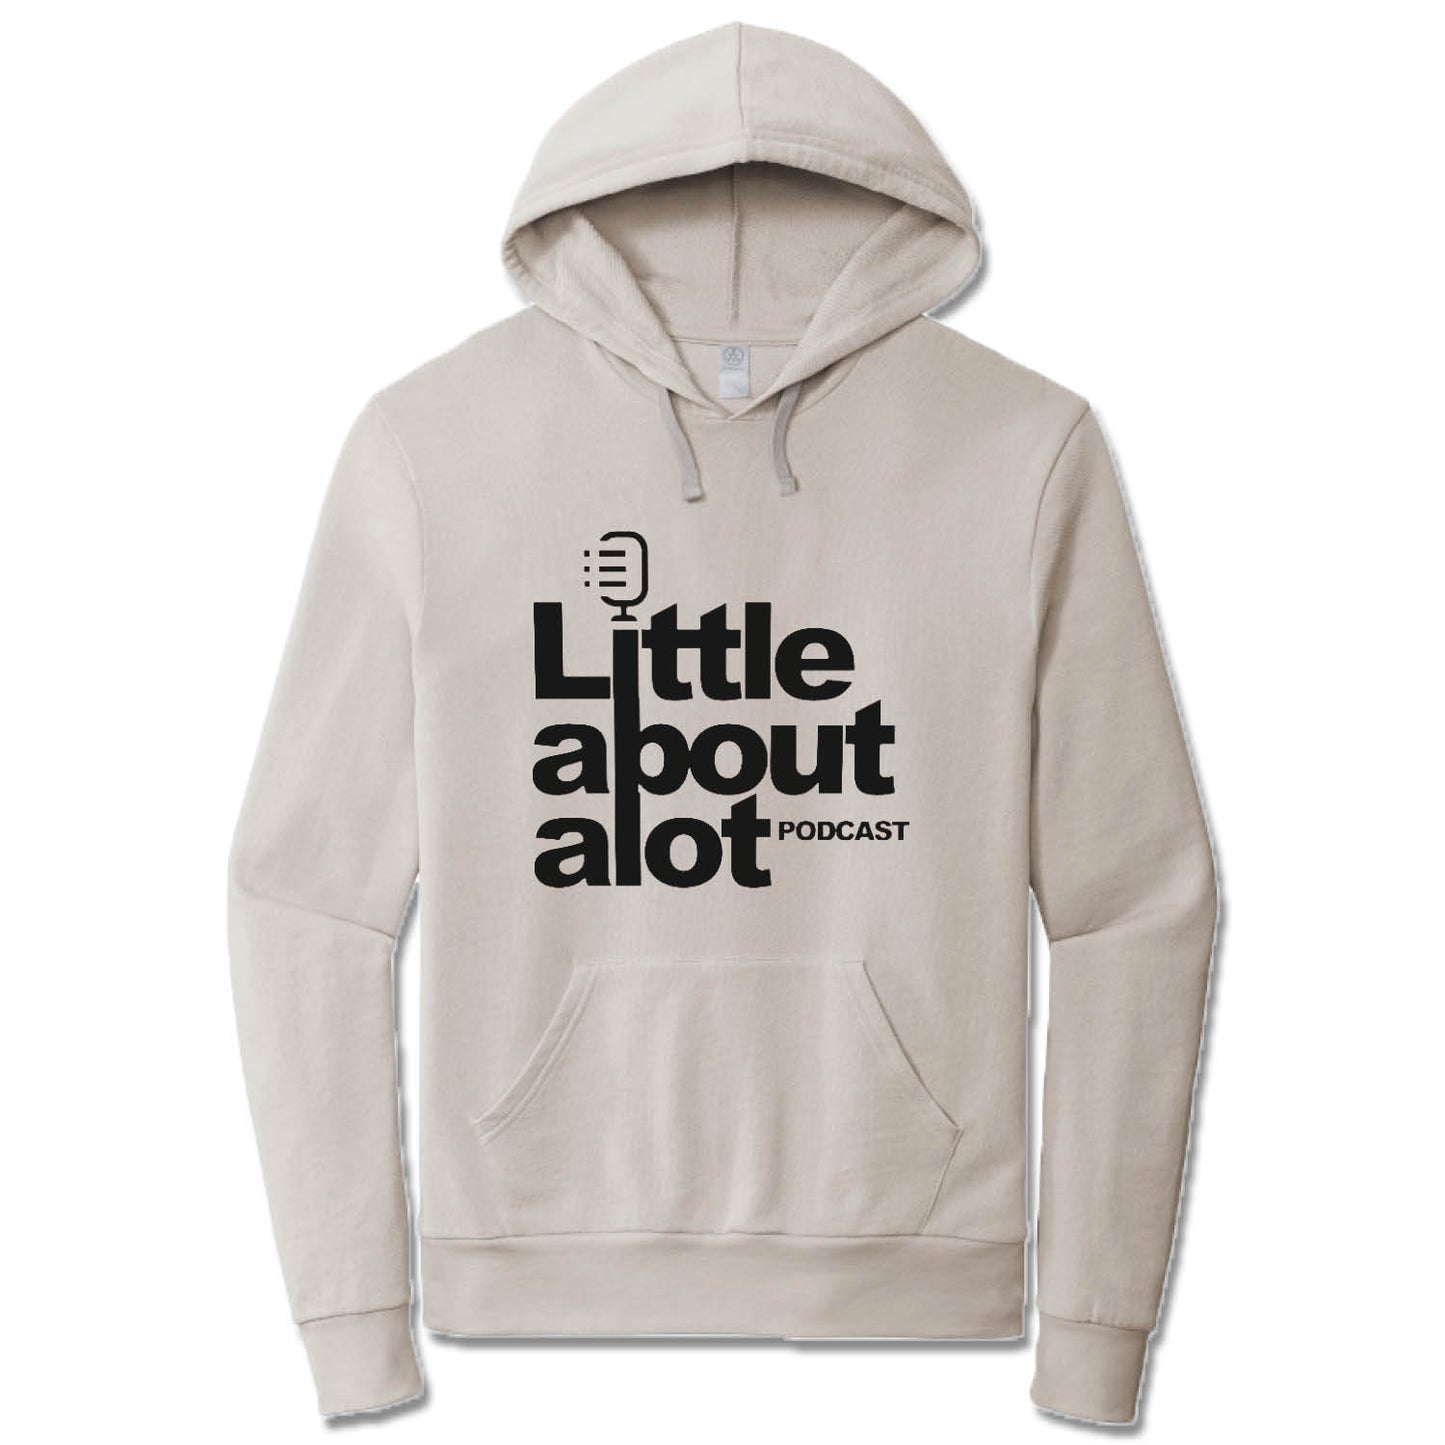 LITTLE ABOUT ALOT PODCAST | LIGHT GRAY FRENCH TERRY HOODIE | BLACK LOGO